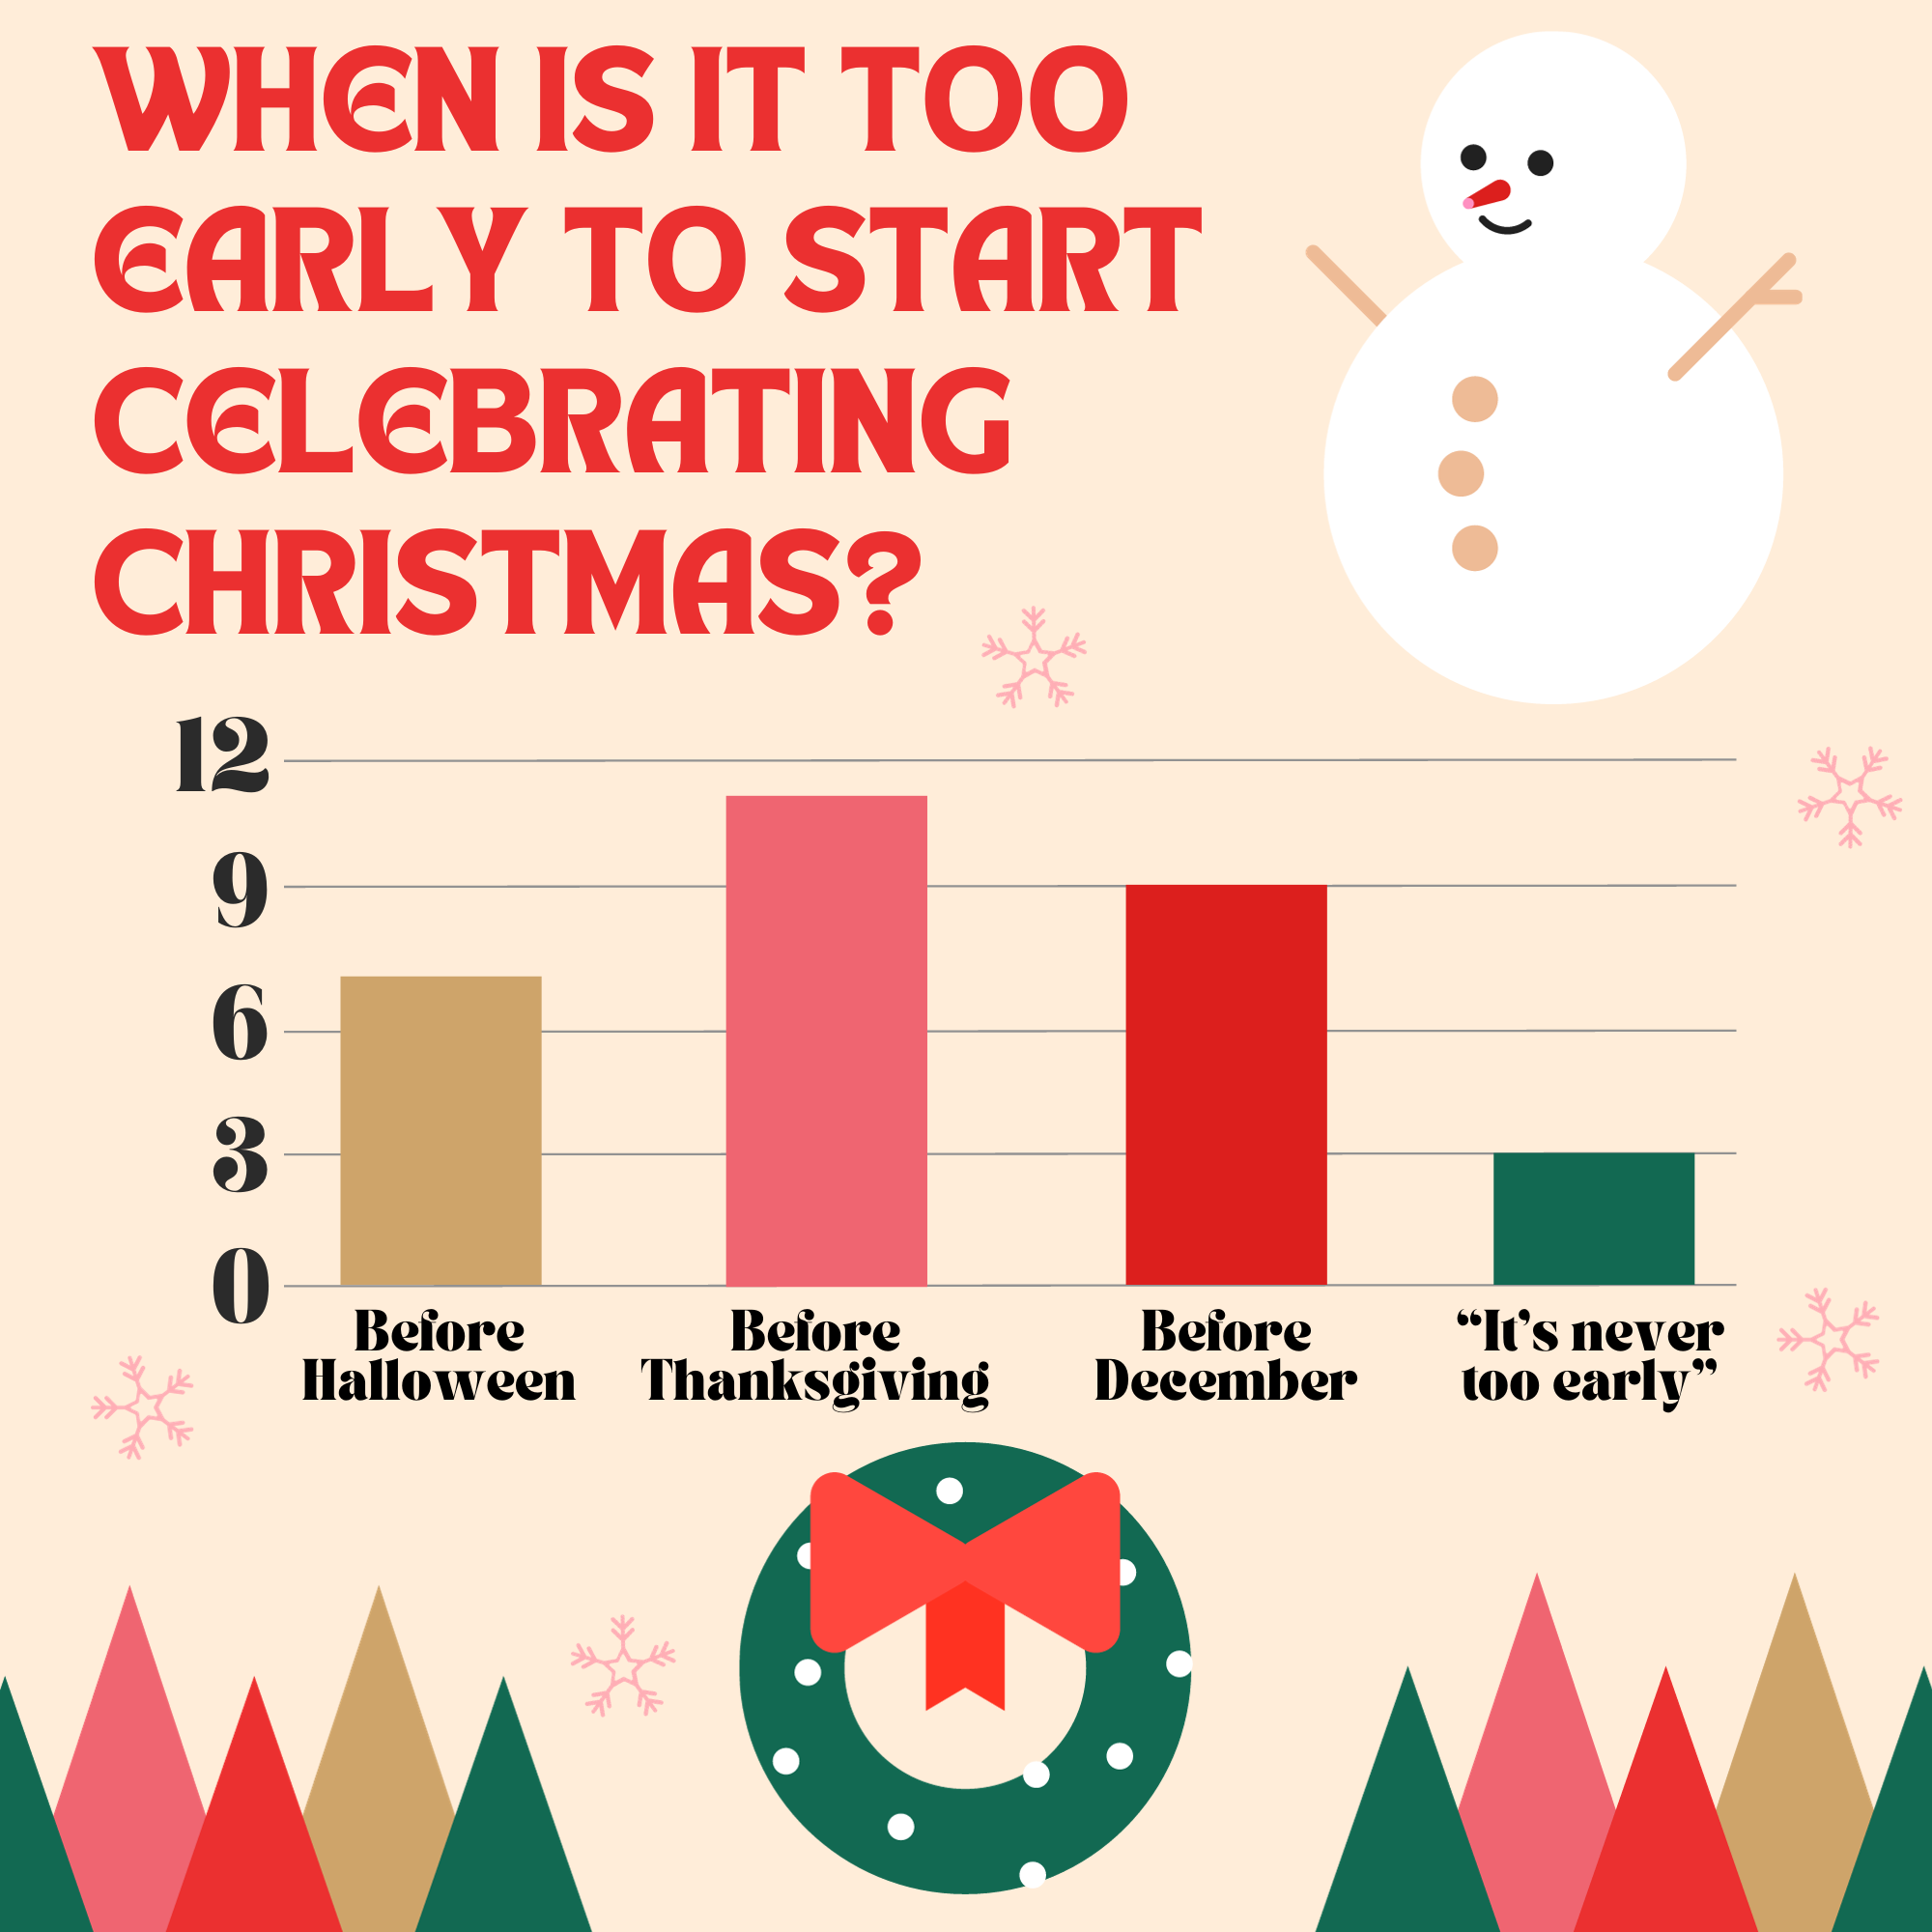 How Early Is Too Early to Celebrate Christmas?